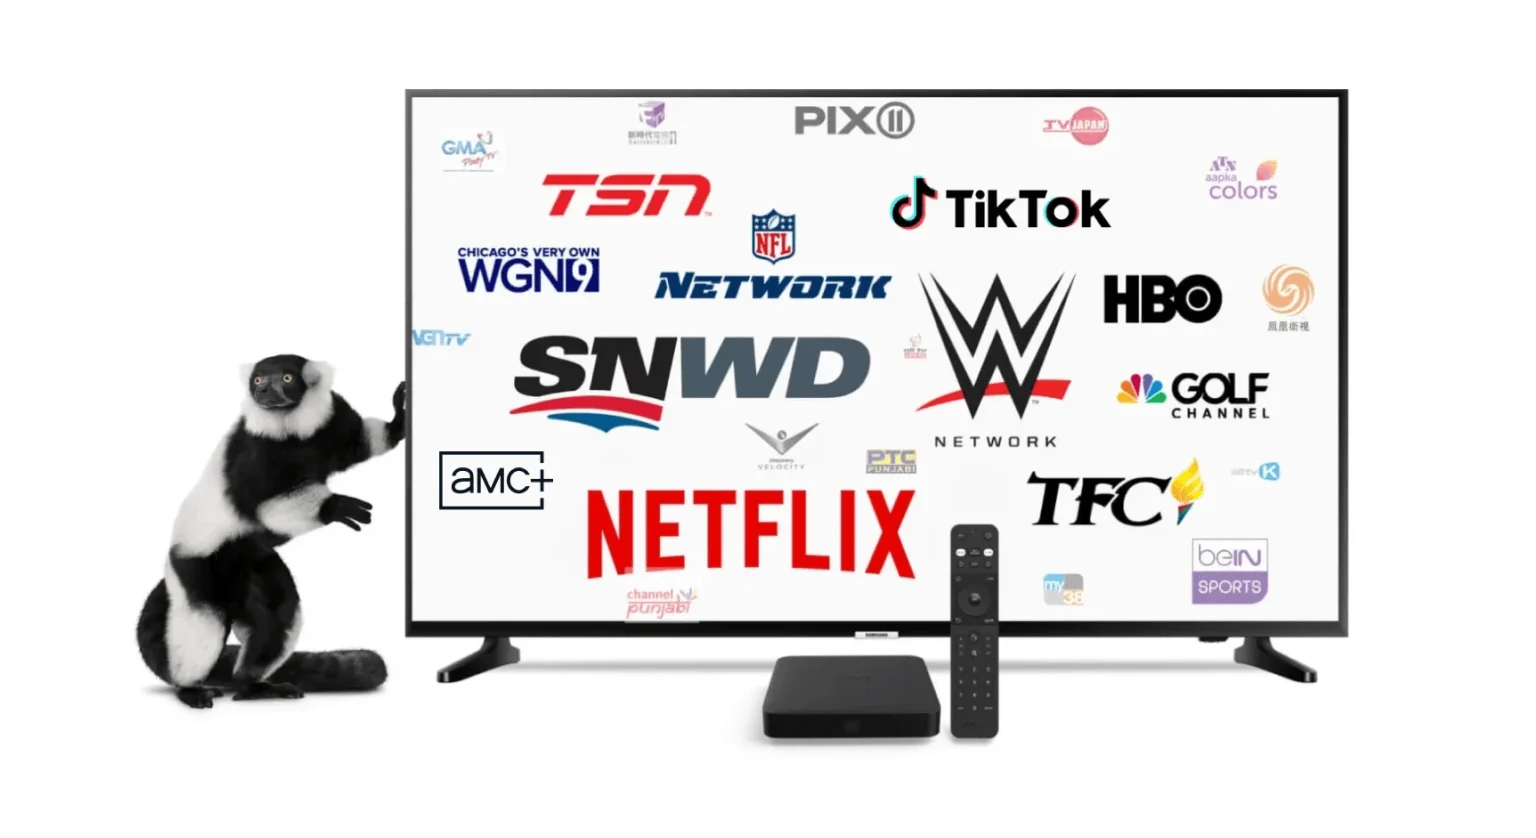 An image showing a lemur and TELUS Optik TV devices alongside a large TV displaying entertainment logos on its screen.